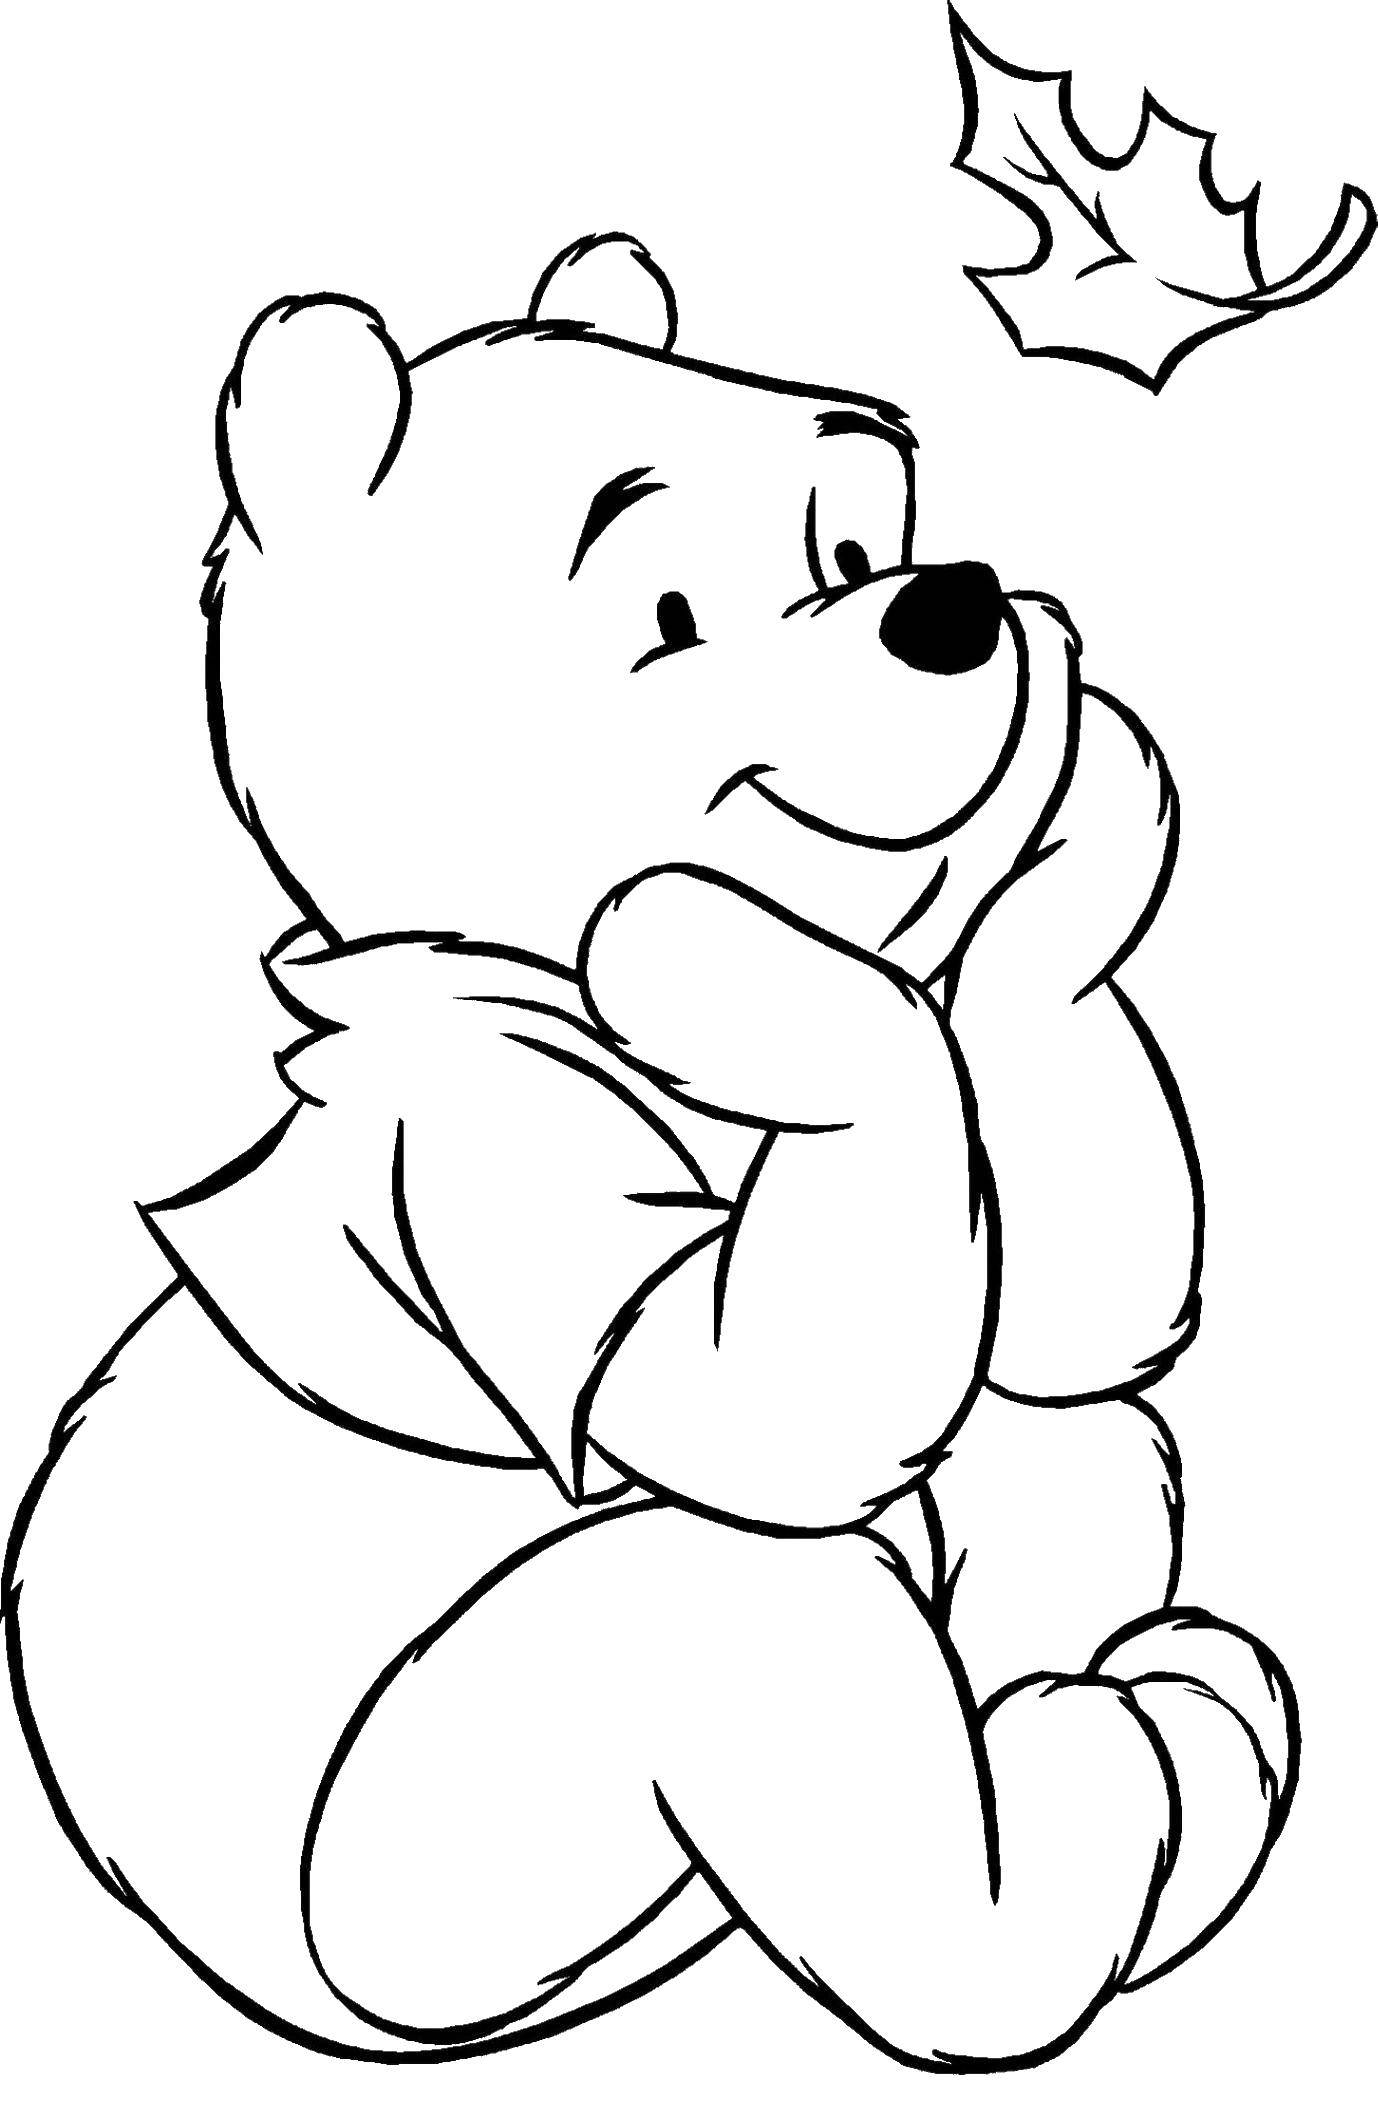 Coloring Winnie the Pooh watching leaf. Category Disney coloring pages. Tags:  cartoons, Winnie the Pooh, a leaf.